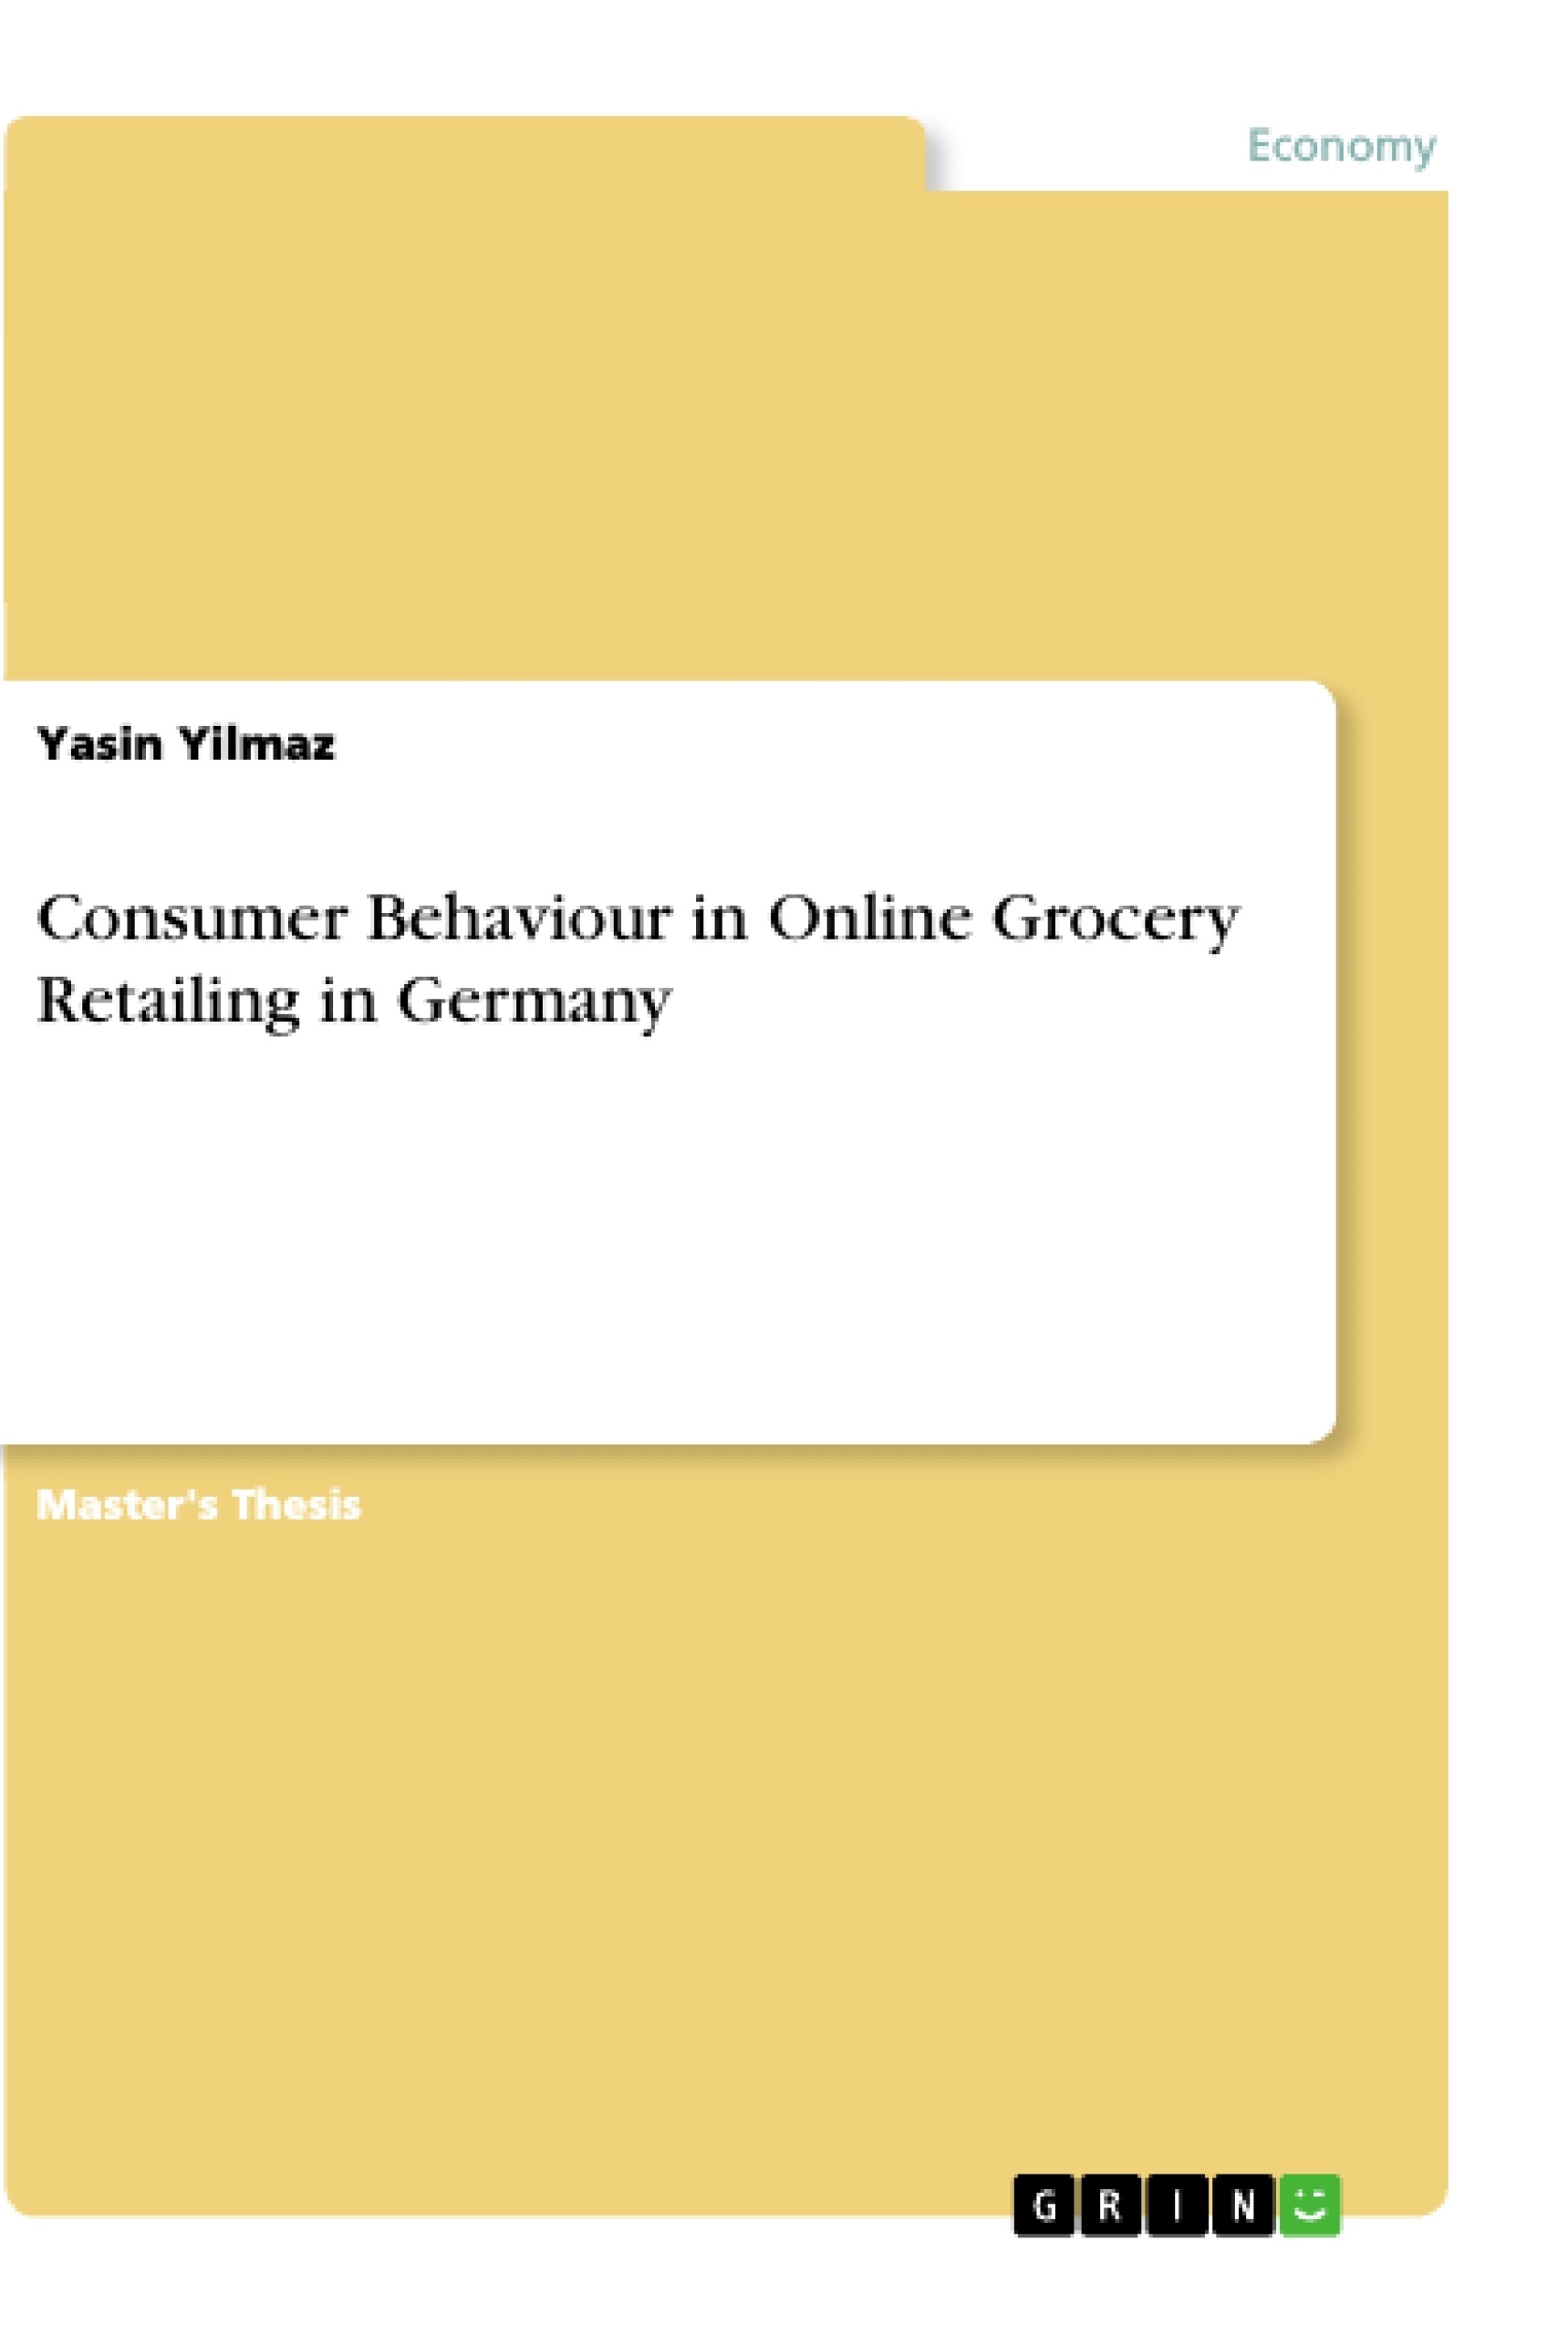 Title: Consumer Behaviour in Online Grocery Retailing in Germany